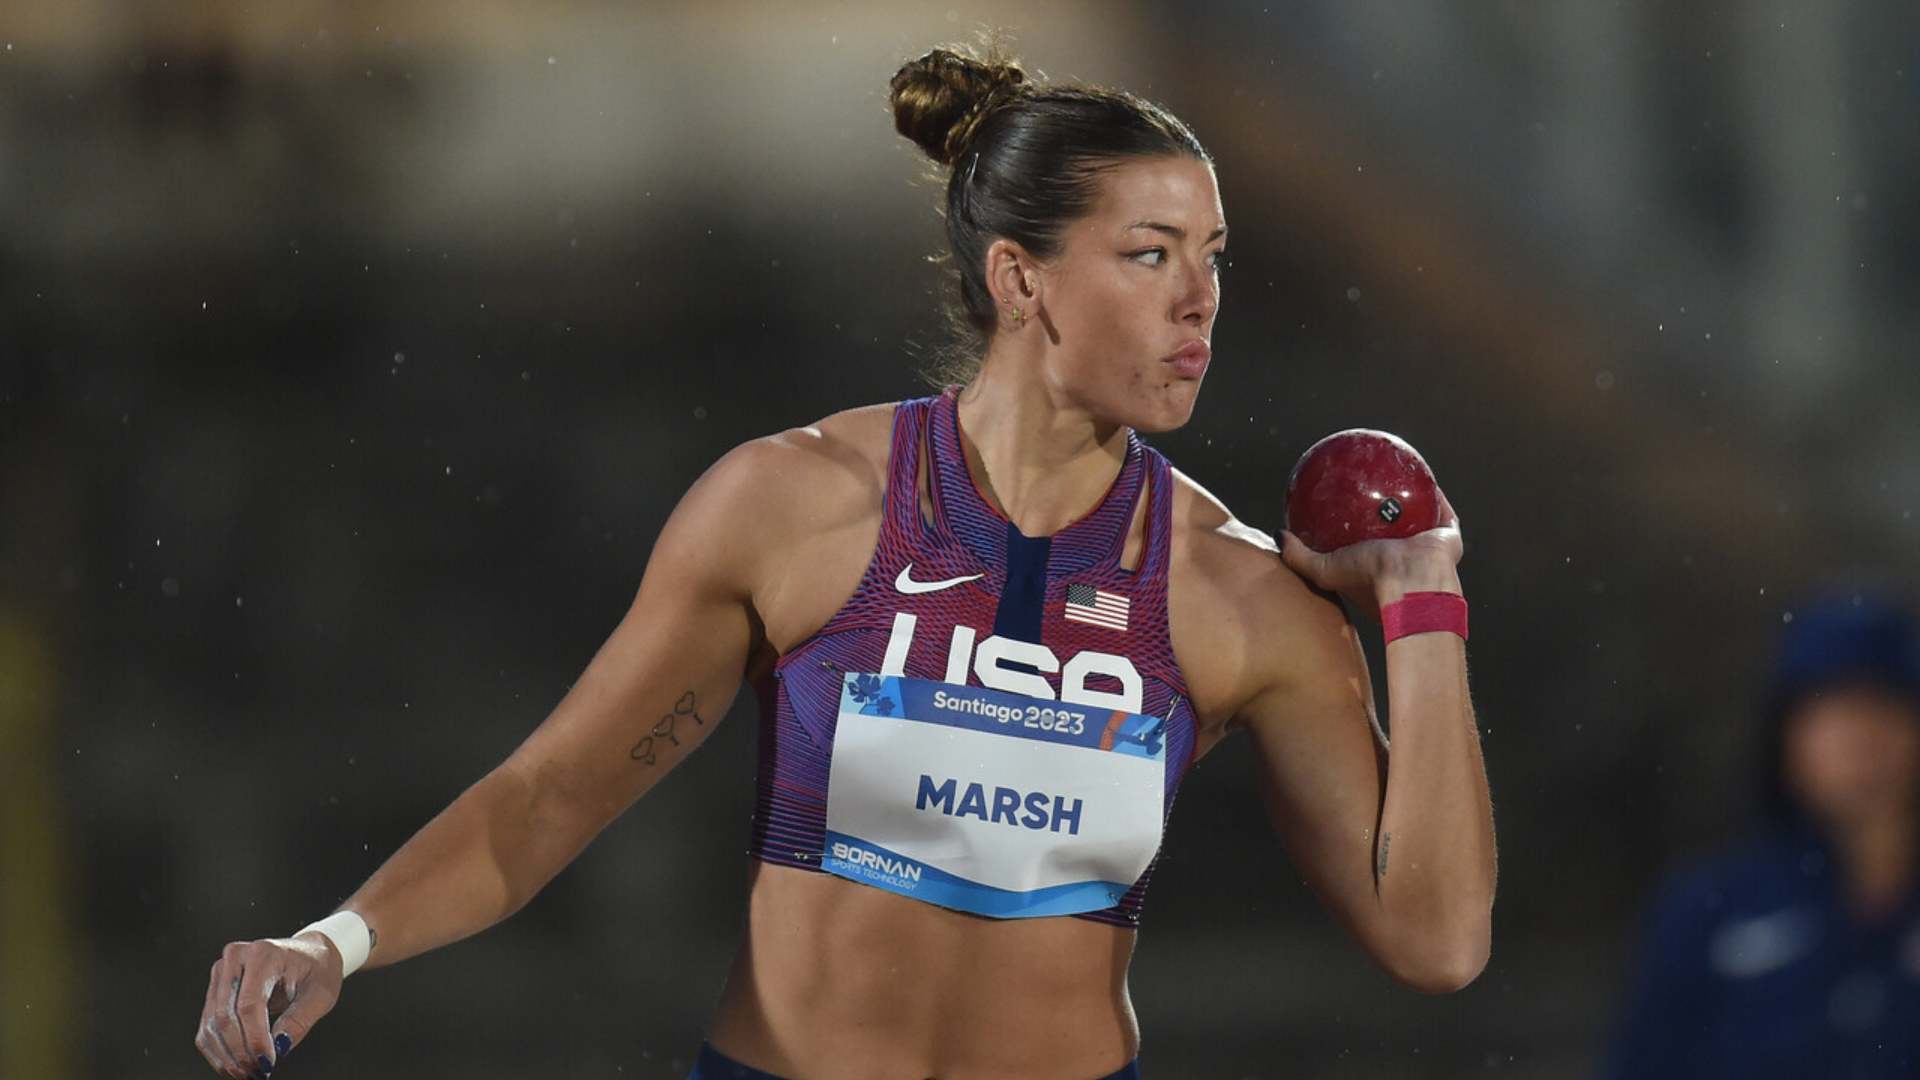 The United States takes the lead in the heptathlon at Santiago 2023